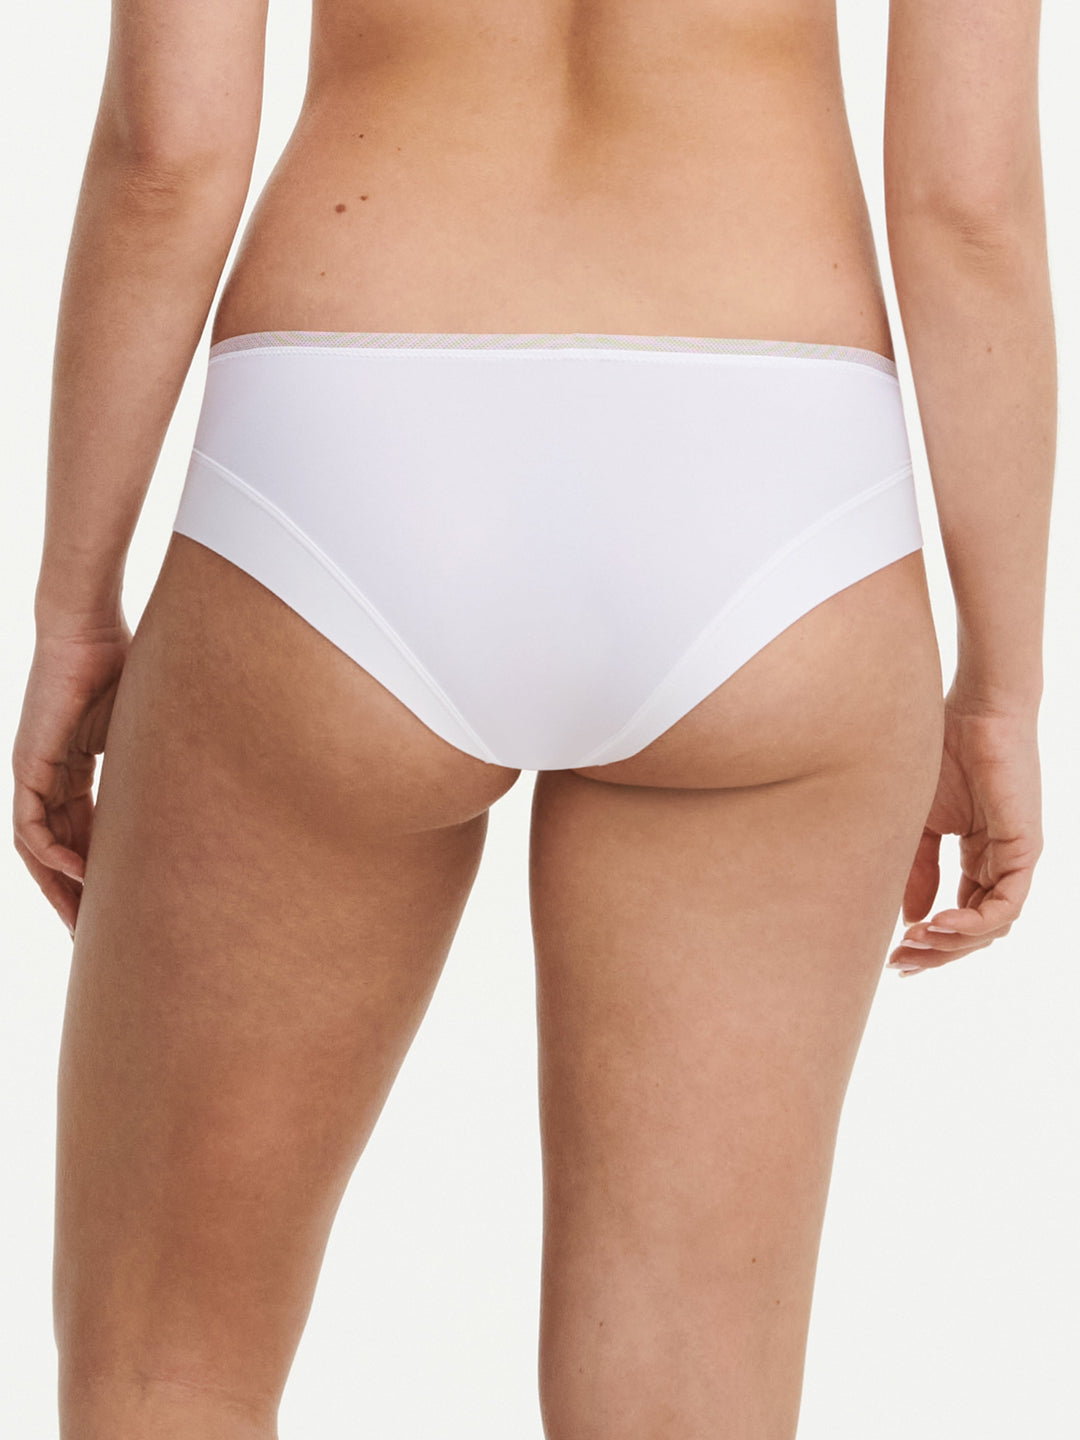 Chantelle - Graphic Allure Covering Shorty White Shorty Chantelle 